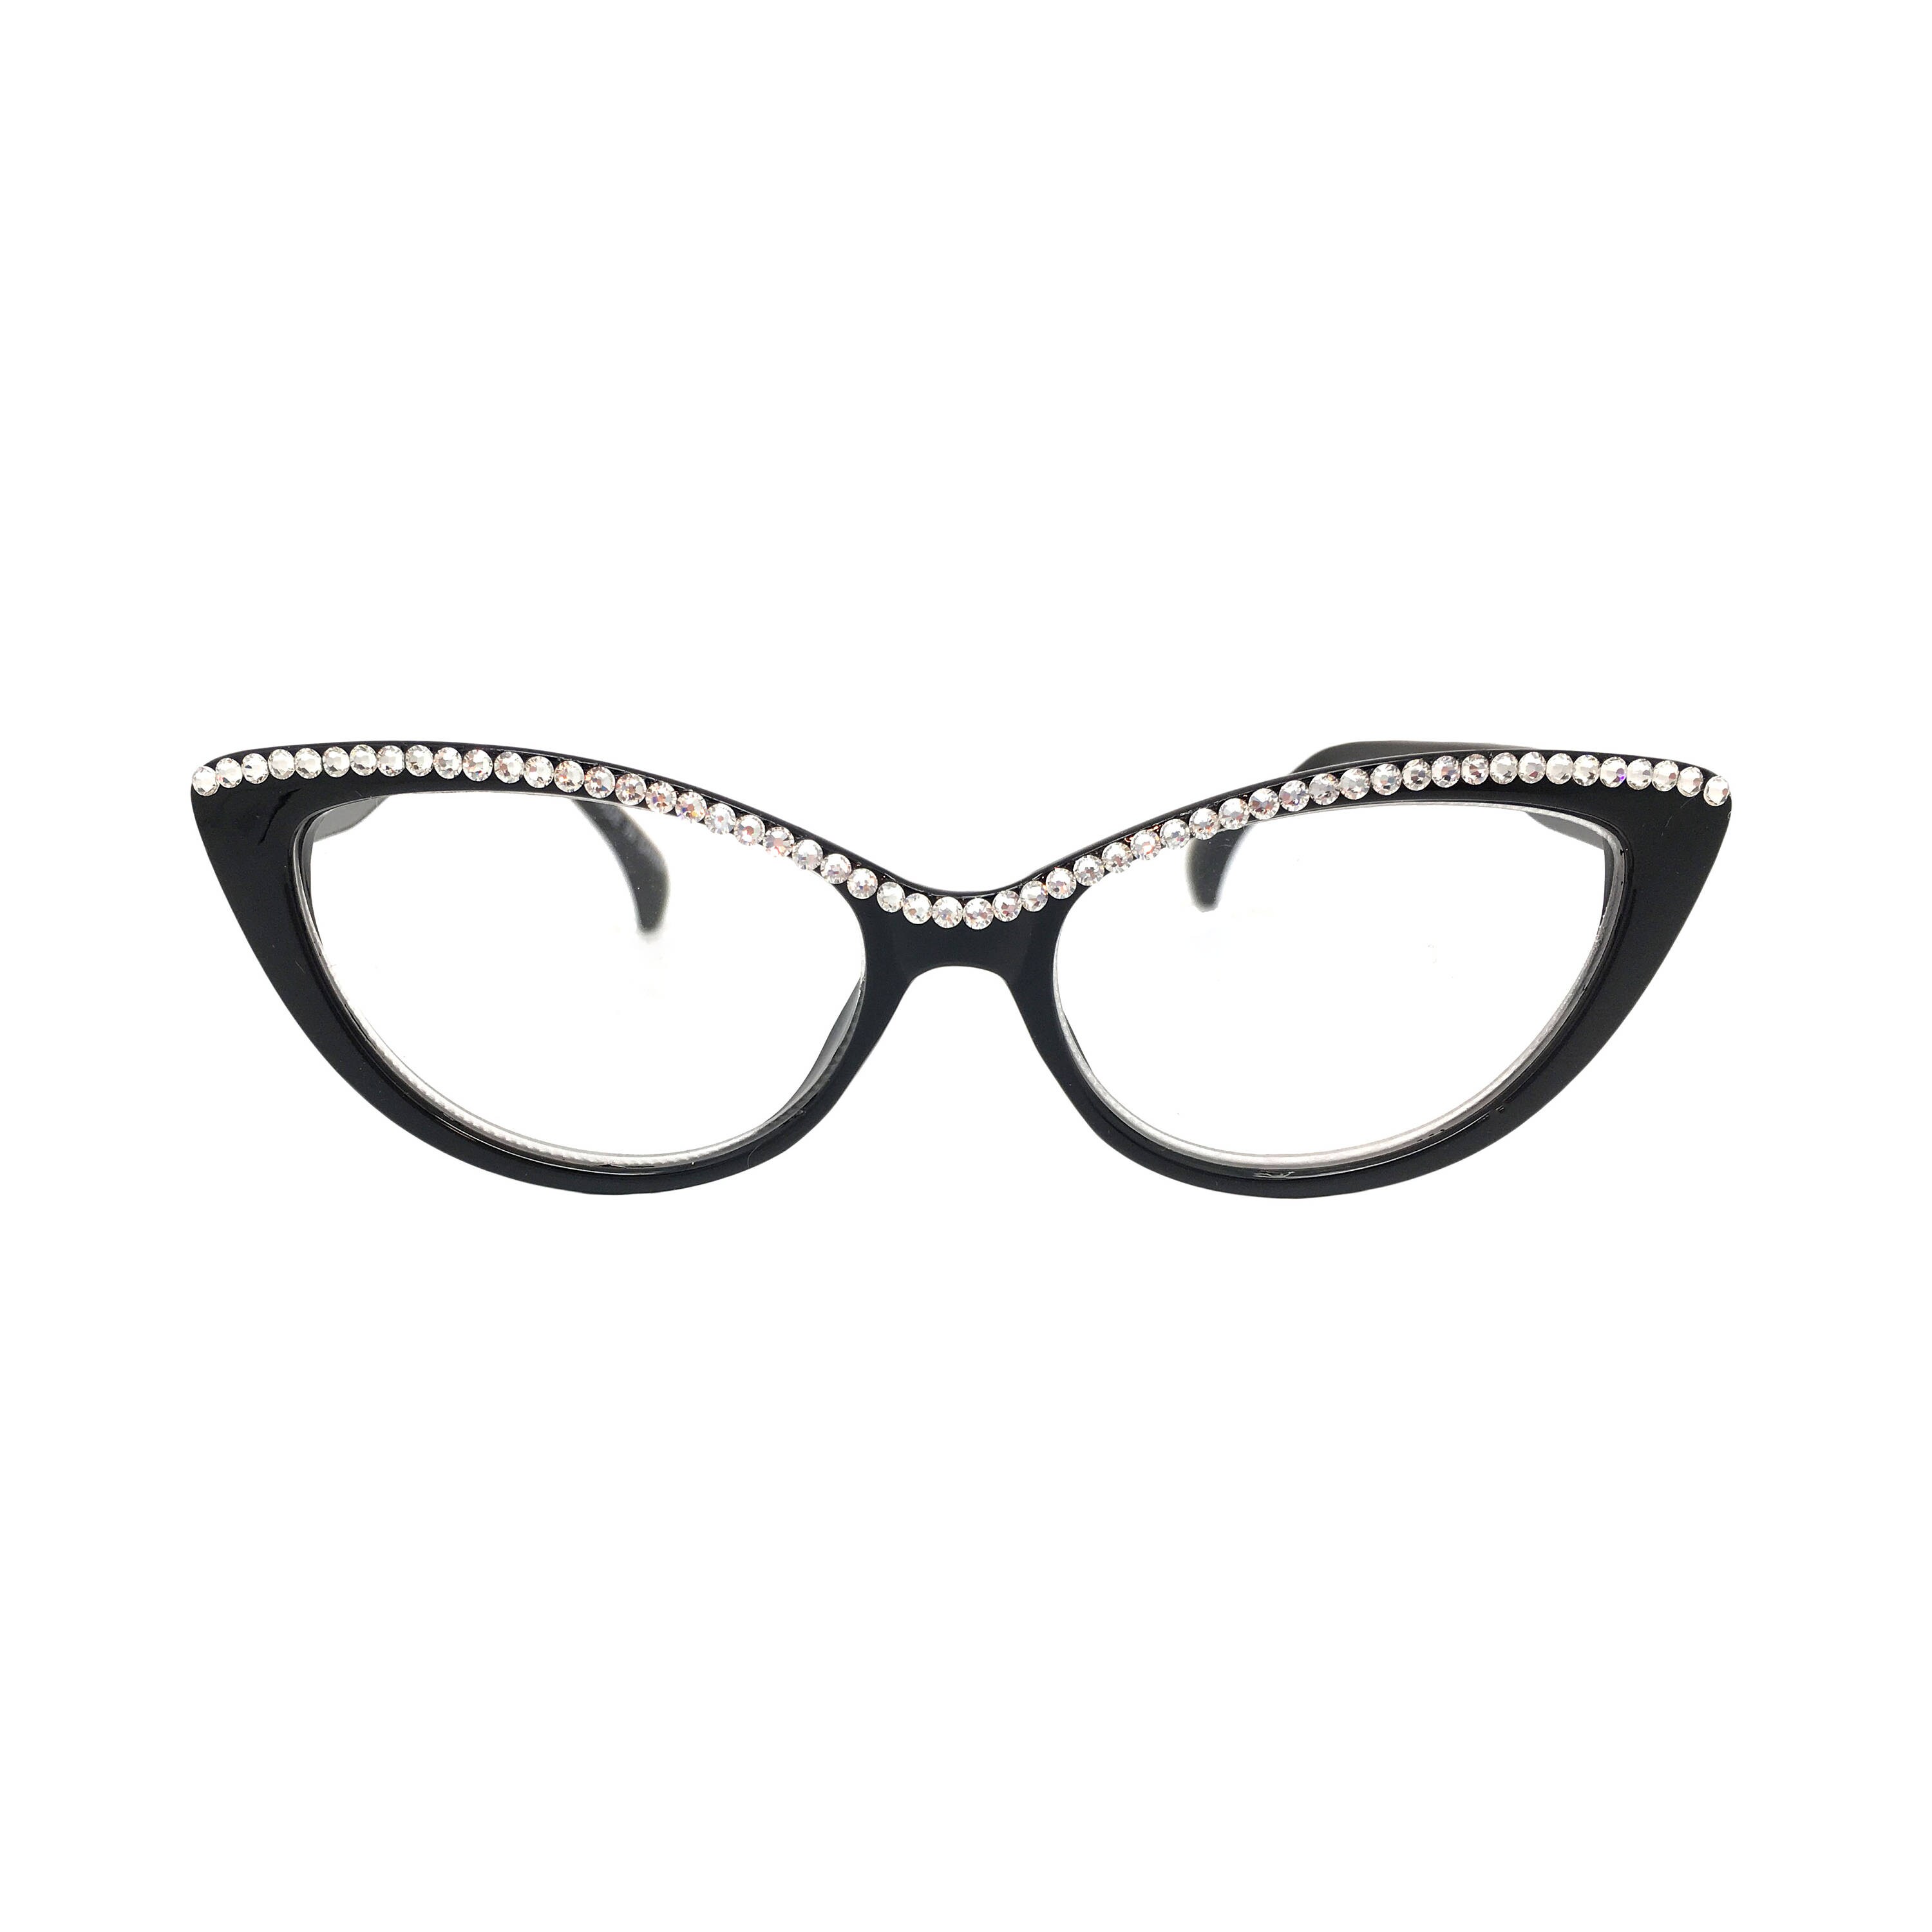 Pawsitive Black cat Eye Reading Glasses With Crystal - Etsy